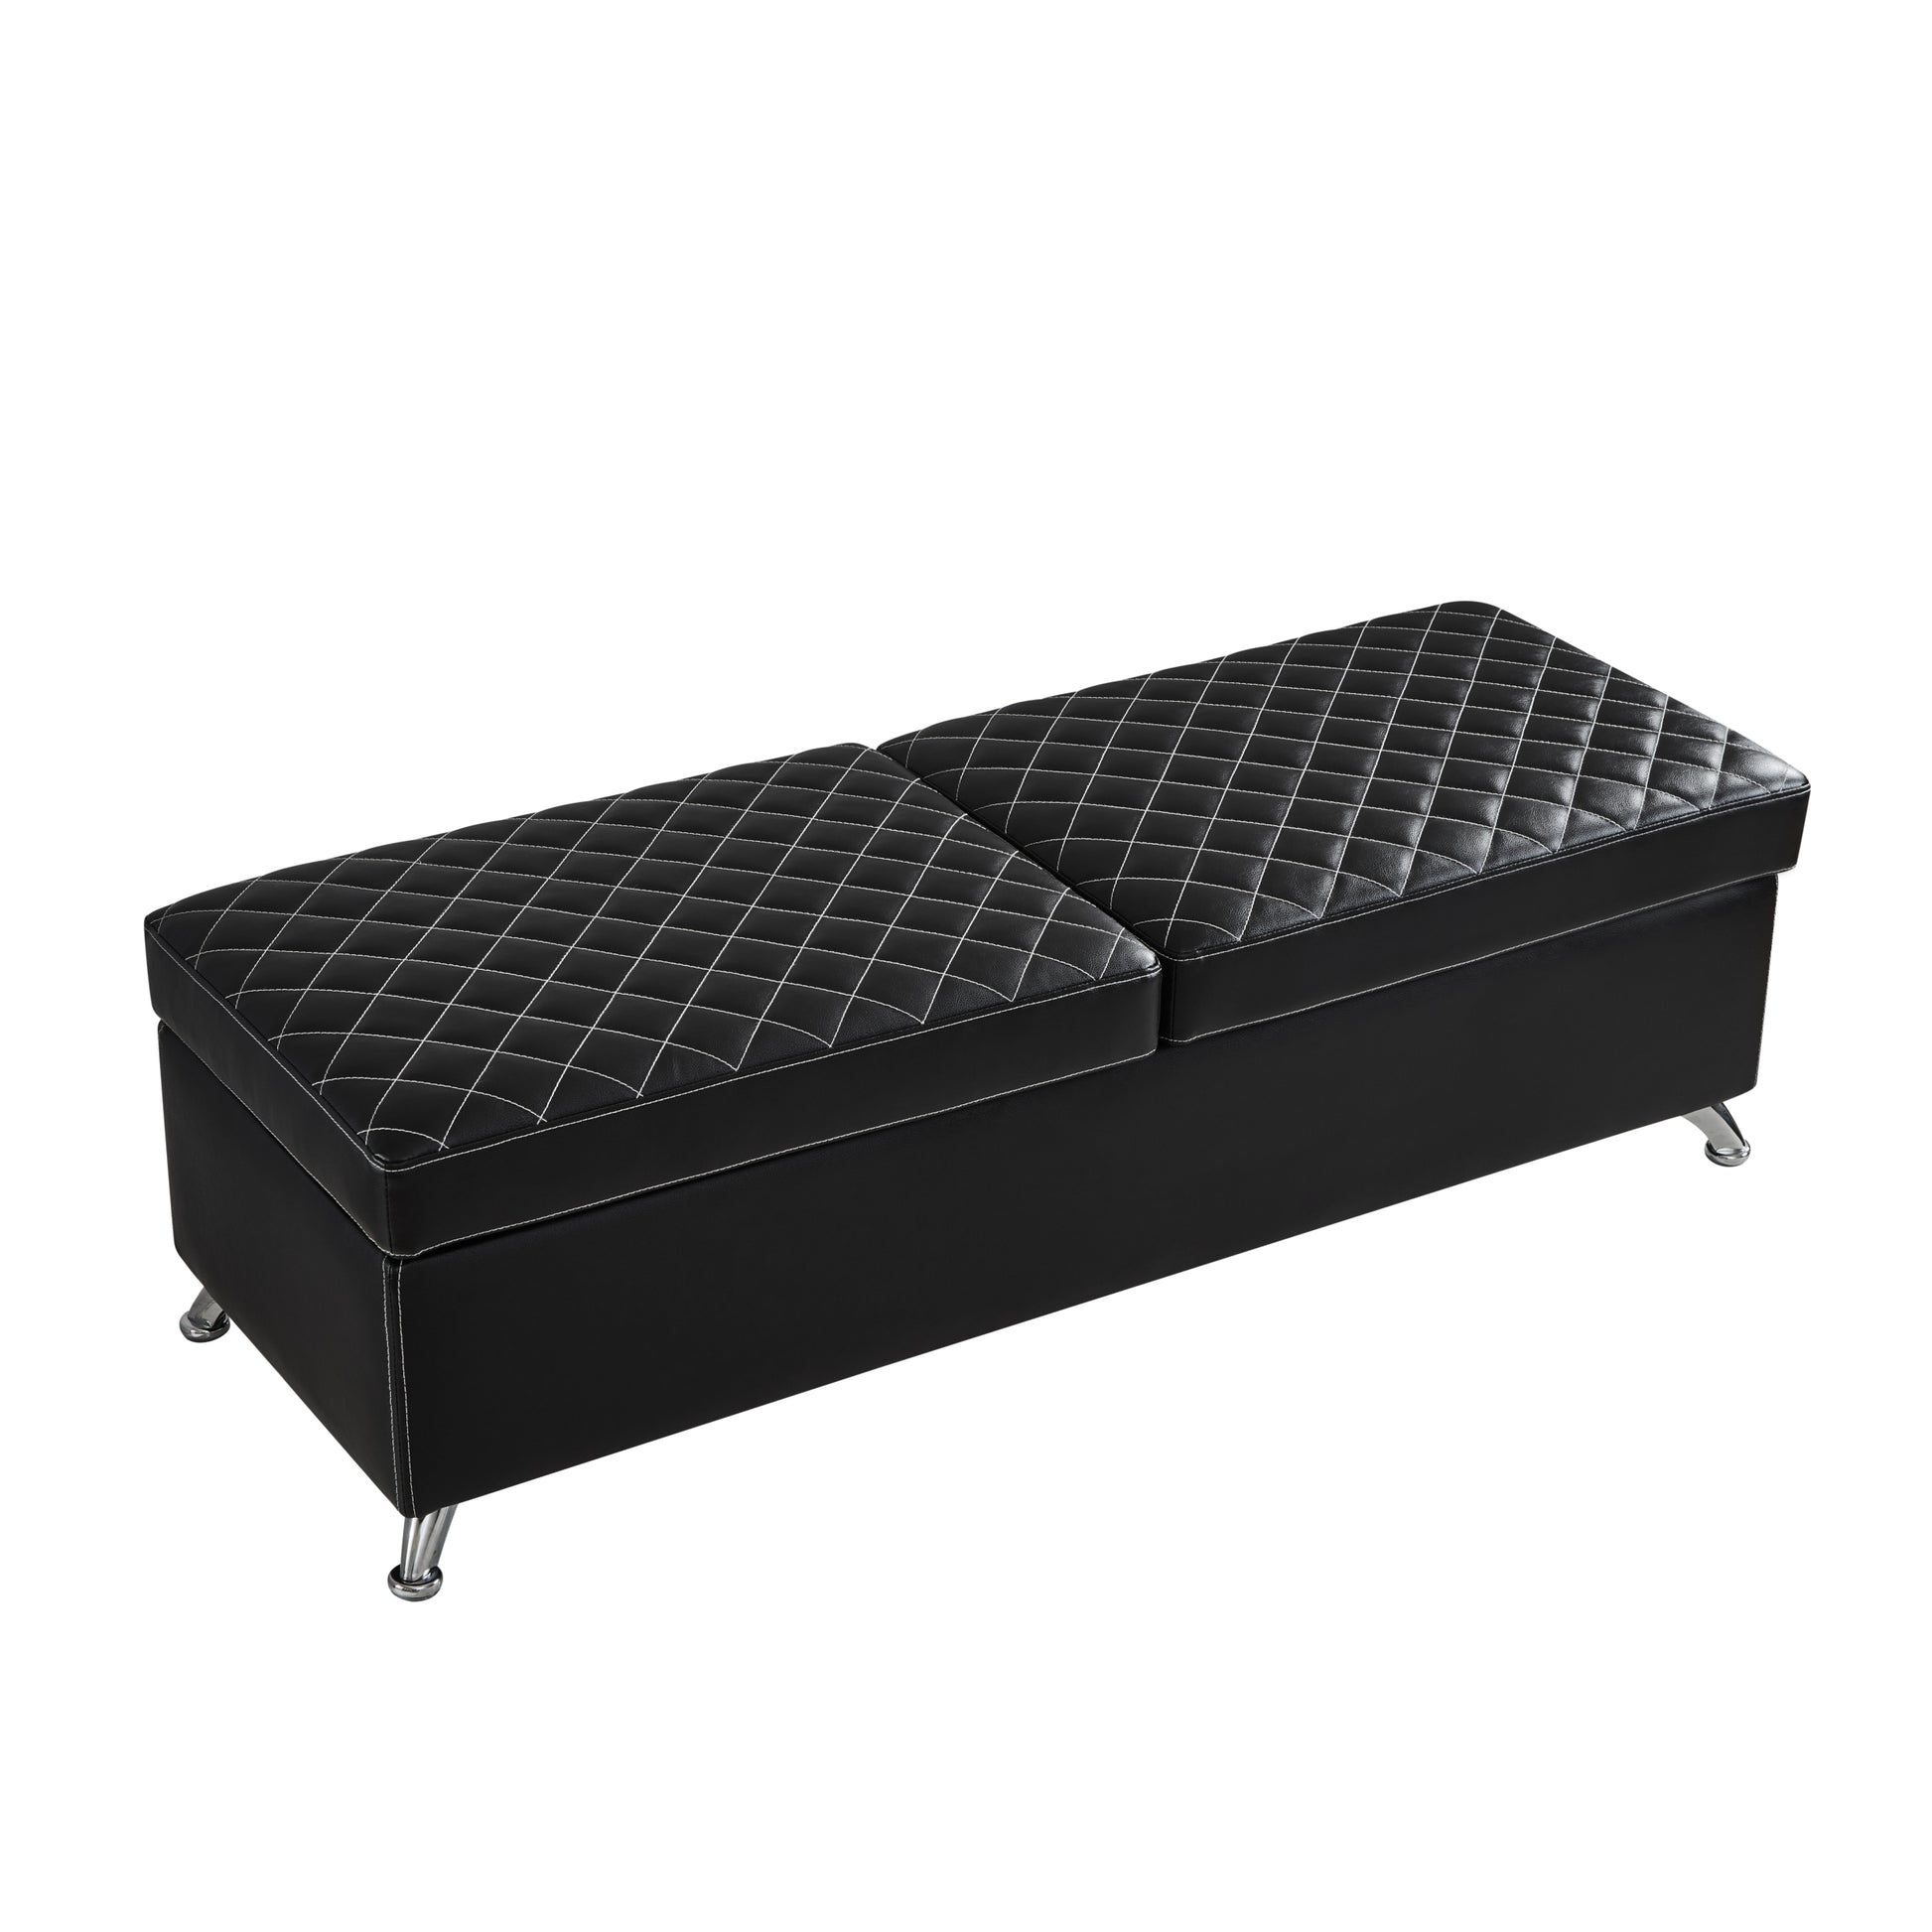 56.7" Bed Bench with Storage Black Leather black-pu